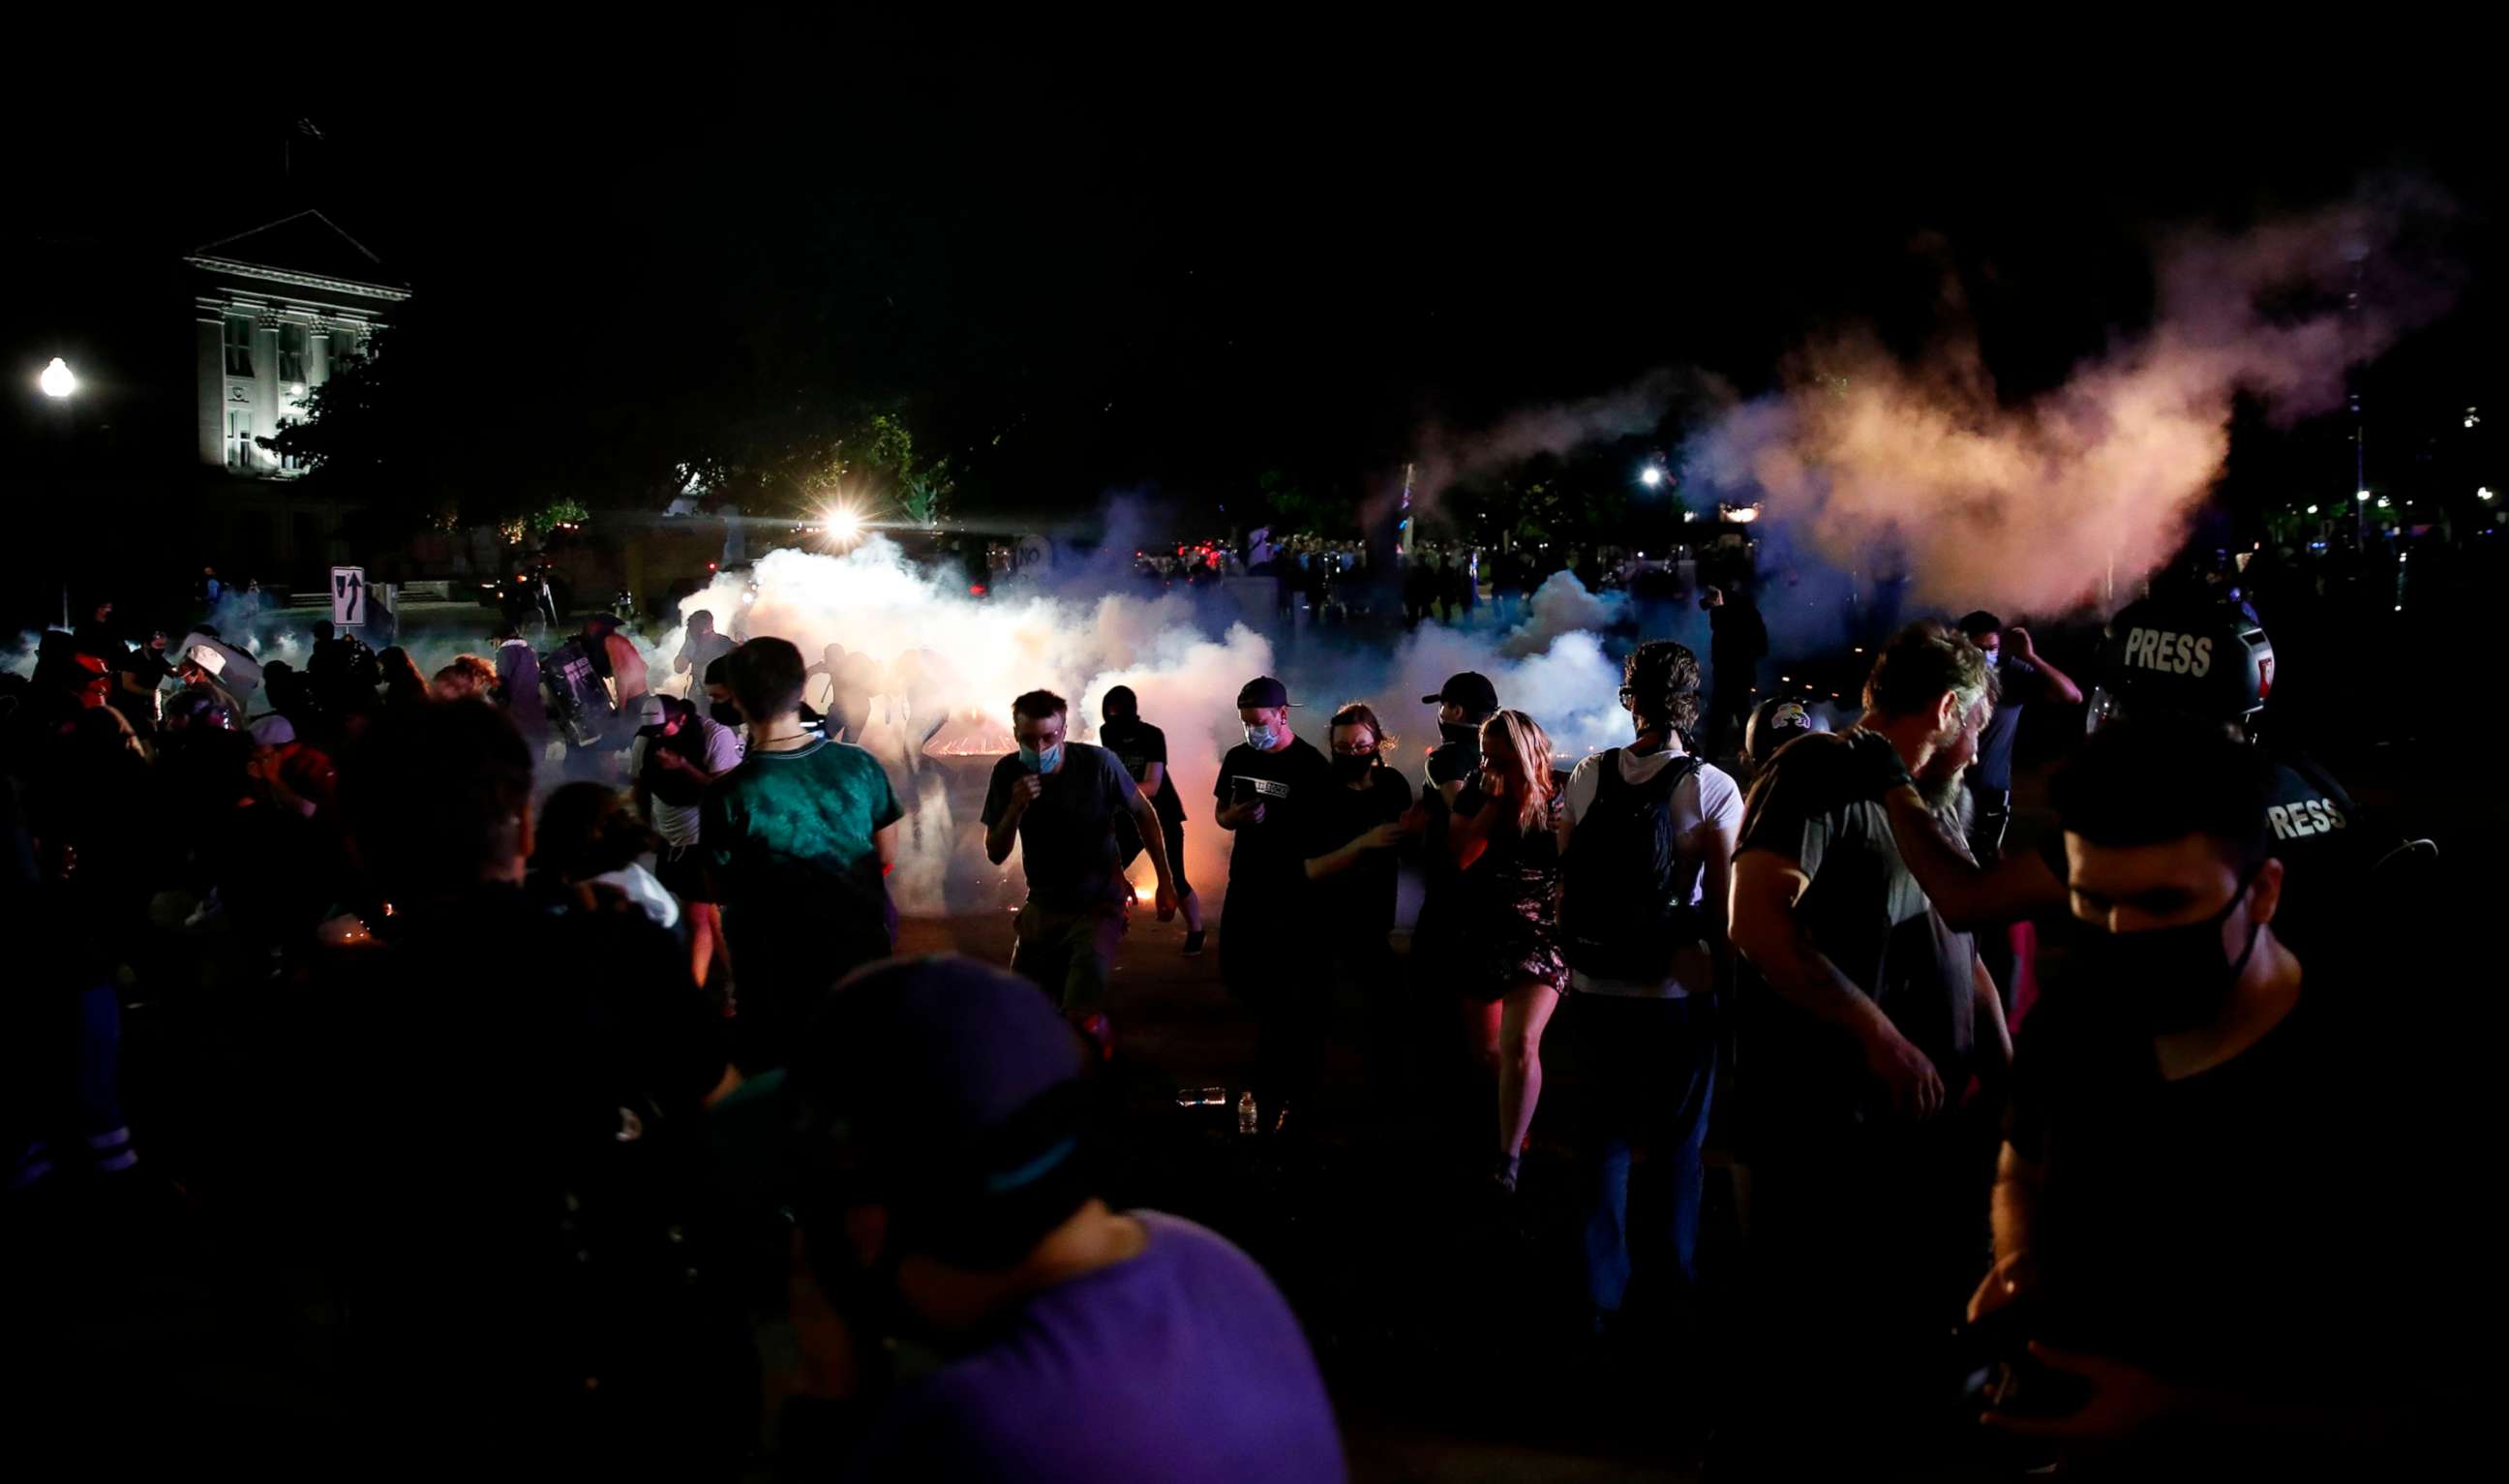 PHOTO: Protestors run for cover as police shoots teargas in an effort to disperse the crowd outside the County Courthouse during demonstrations against the shooting of Jacob Blake in Kenosha, Wis. on Aug. 25, 2020.